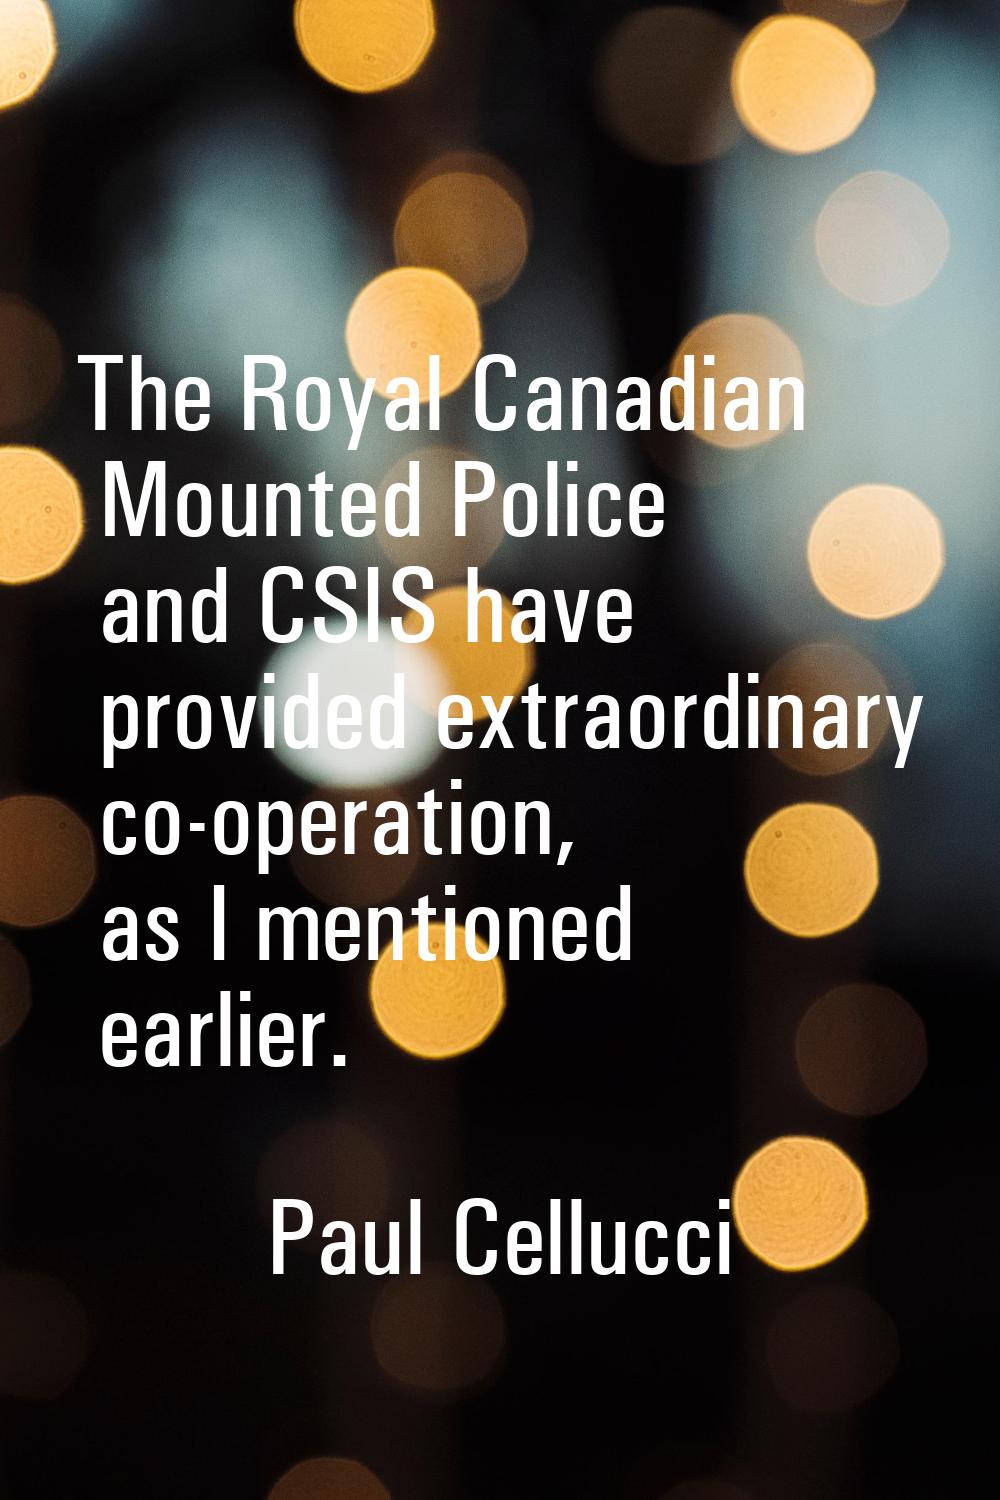 The Royal Canadian Mounted Police and CSIS have provided extraordinary co-operation, as I mentioned